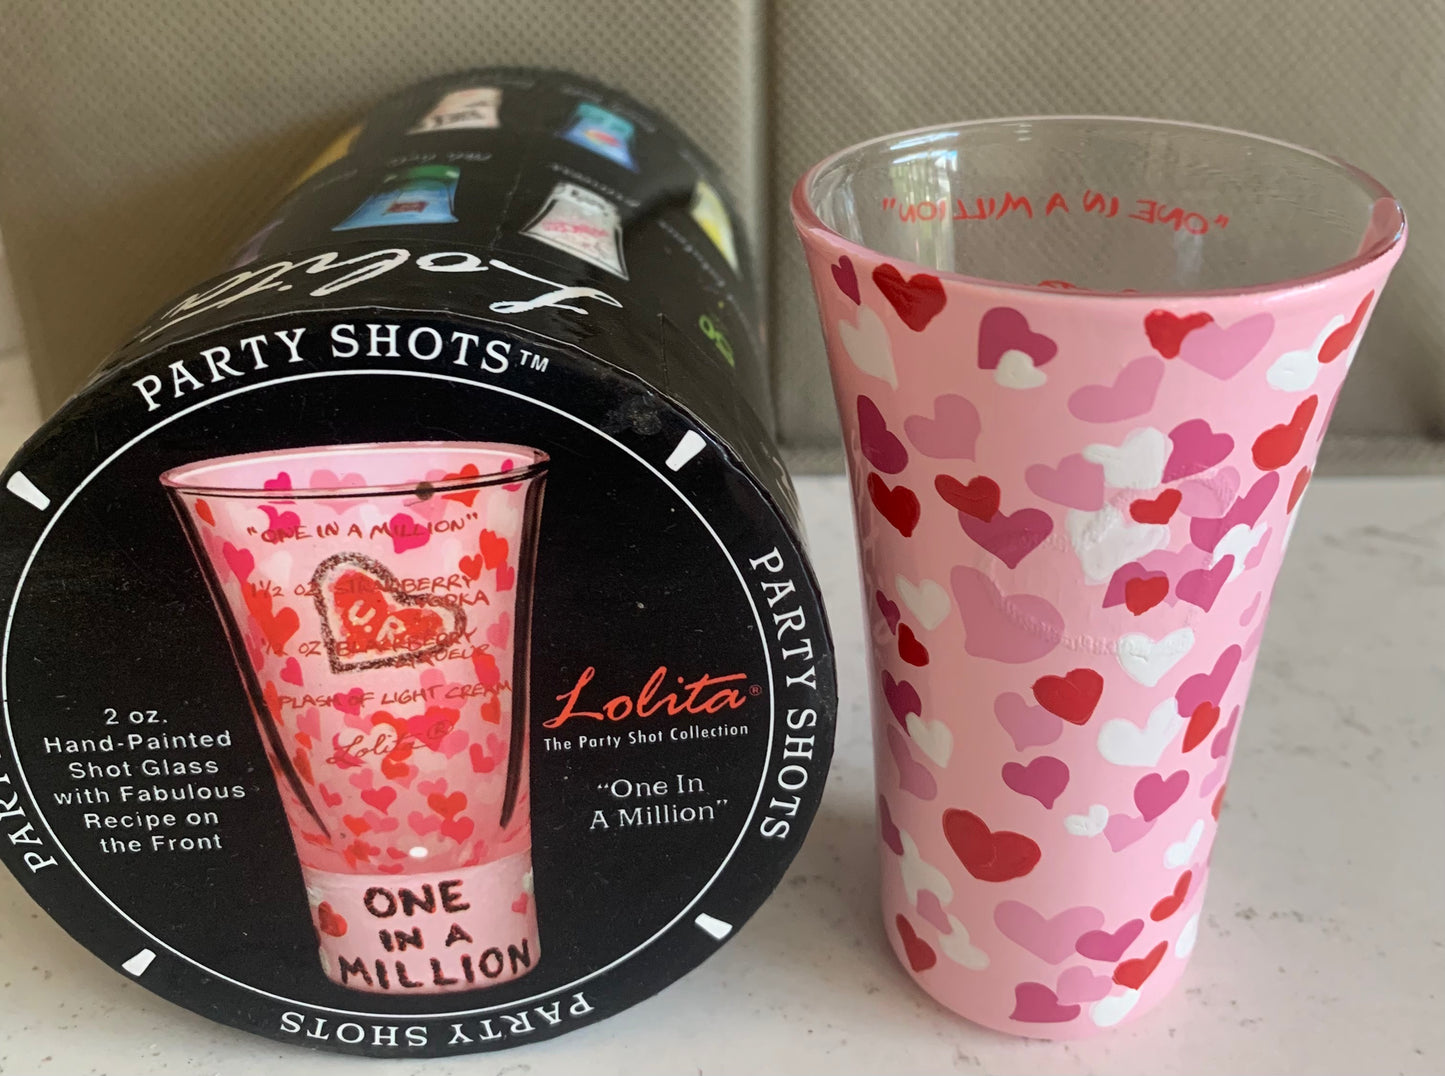 One in a Million Shot Glass, Lolita Shooters